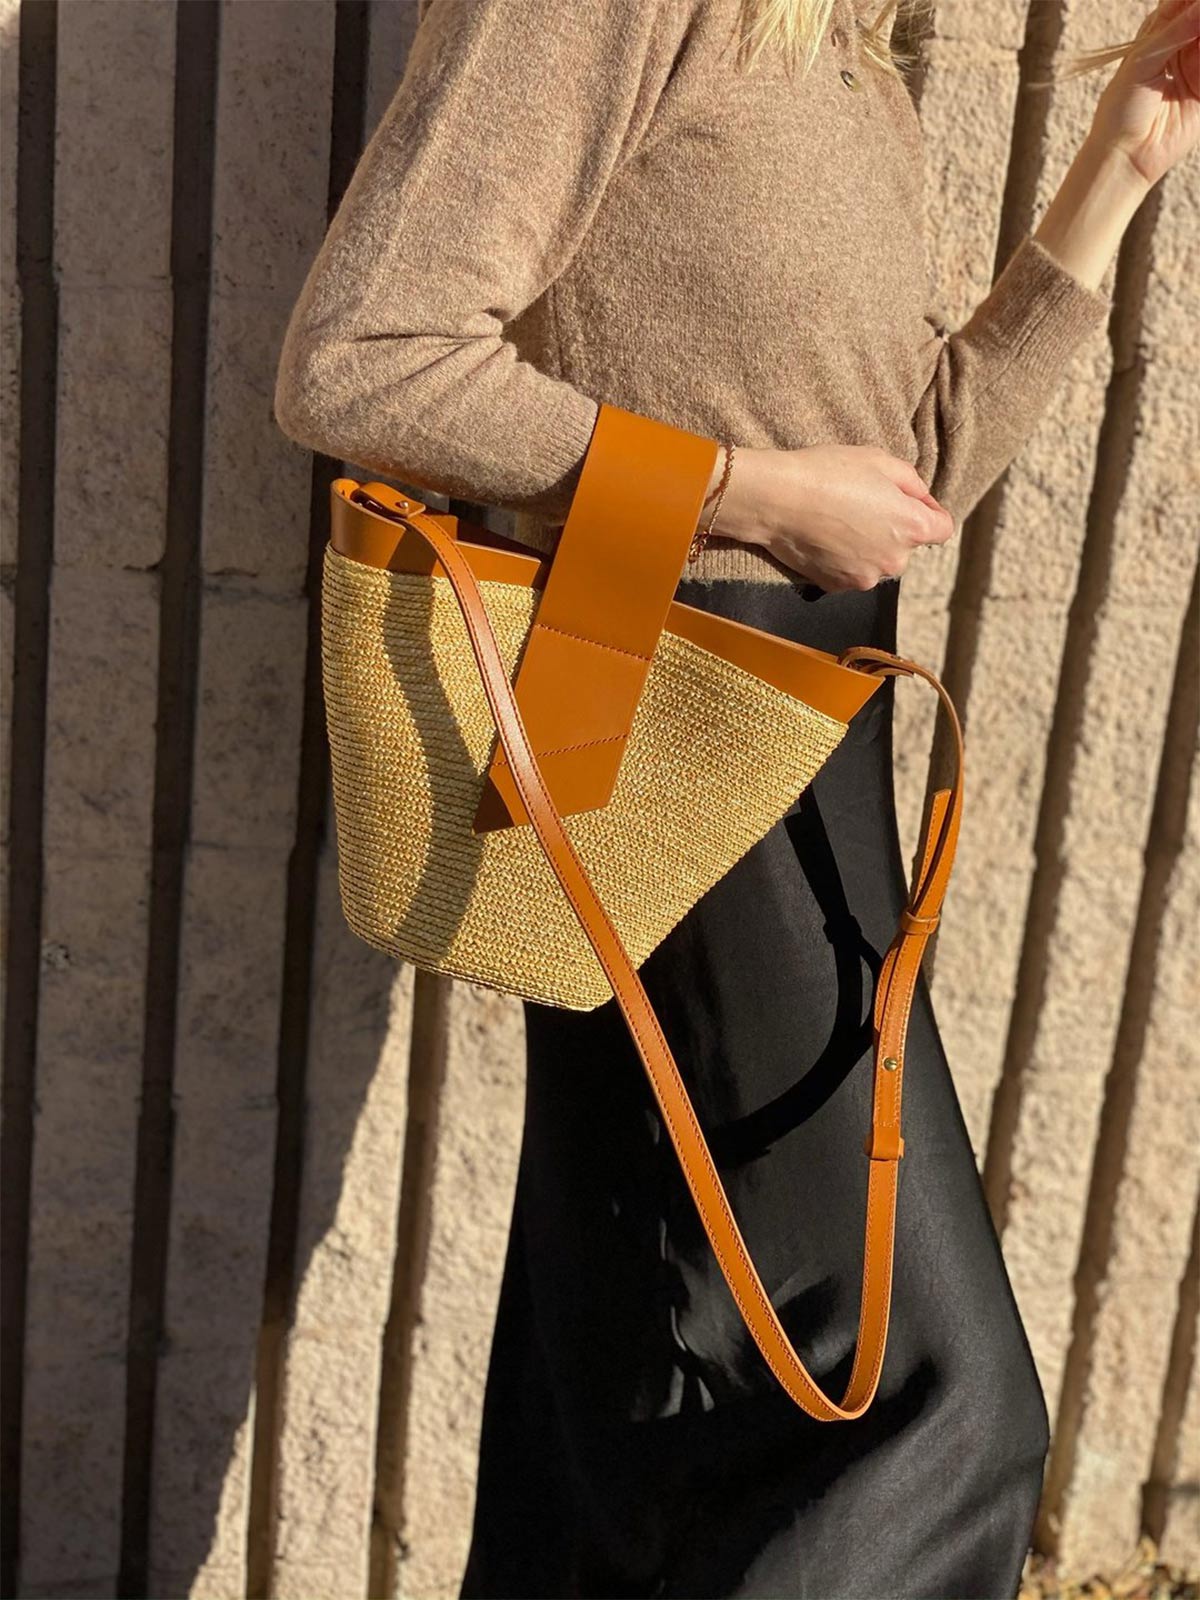 Amphora Straw and Leather Bag Amphora Straw and Leather Bag - Fashionkind